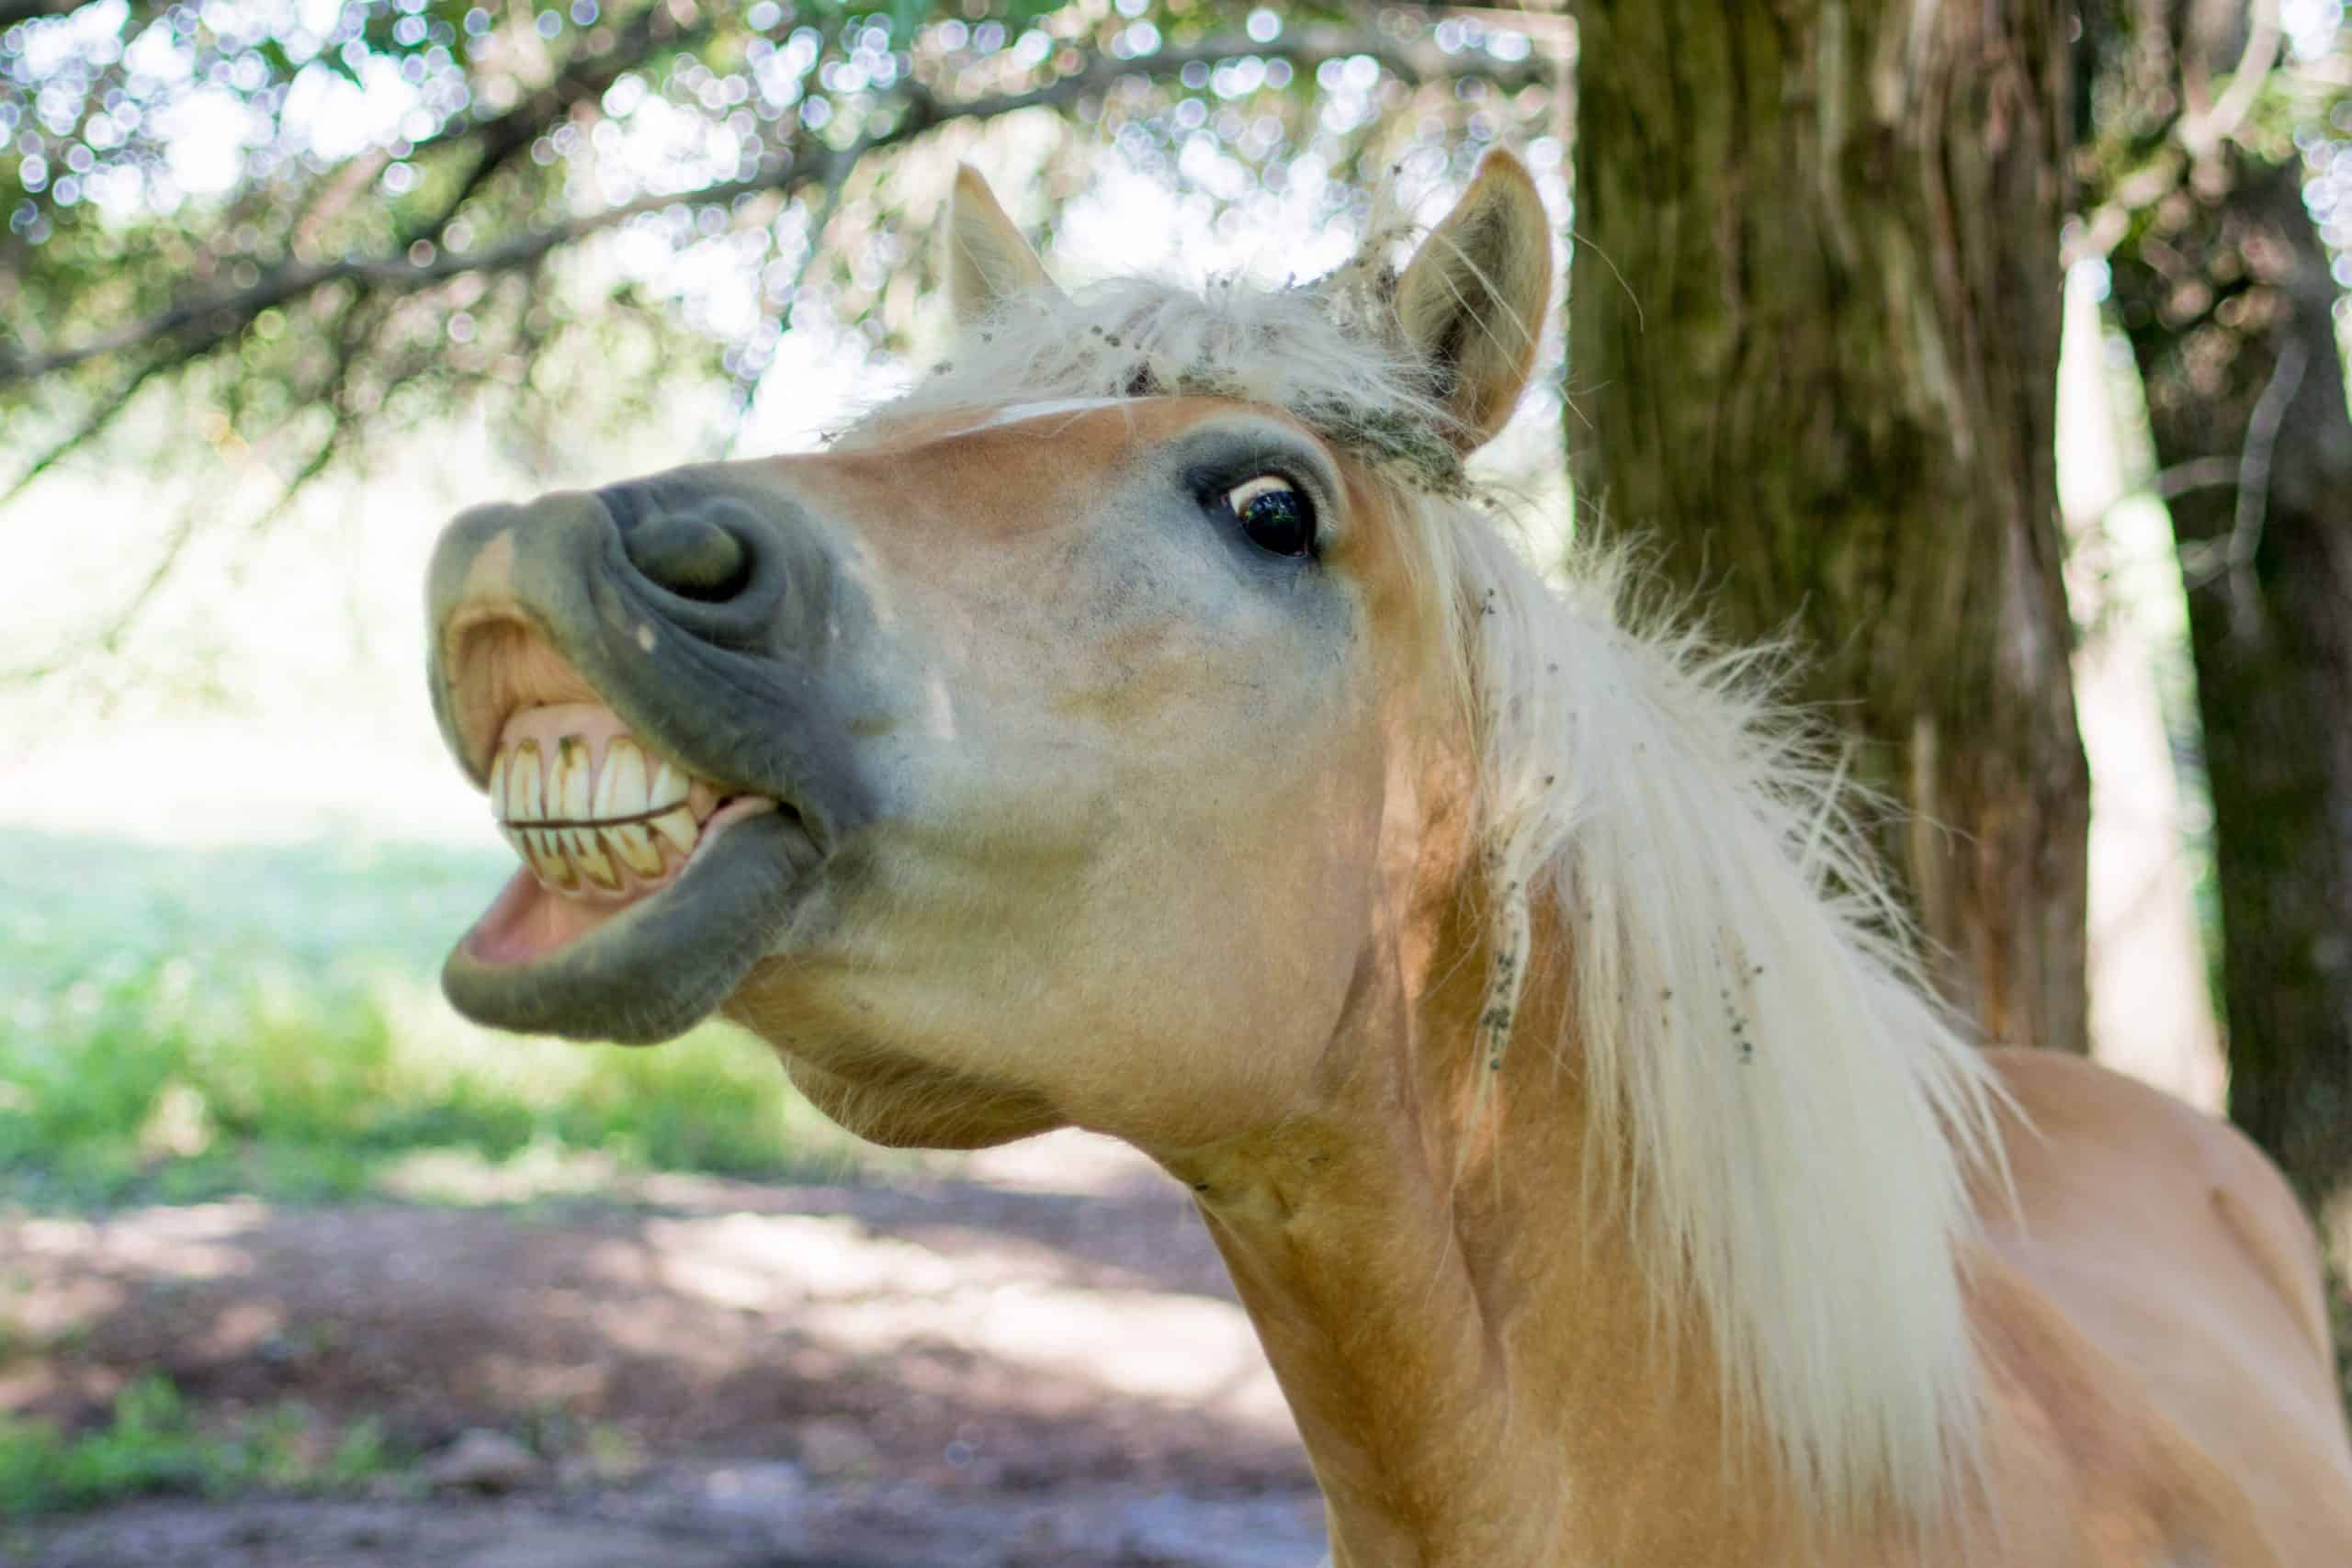 Common Reasons For Why A Horse Opens Its Mouth